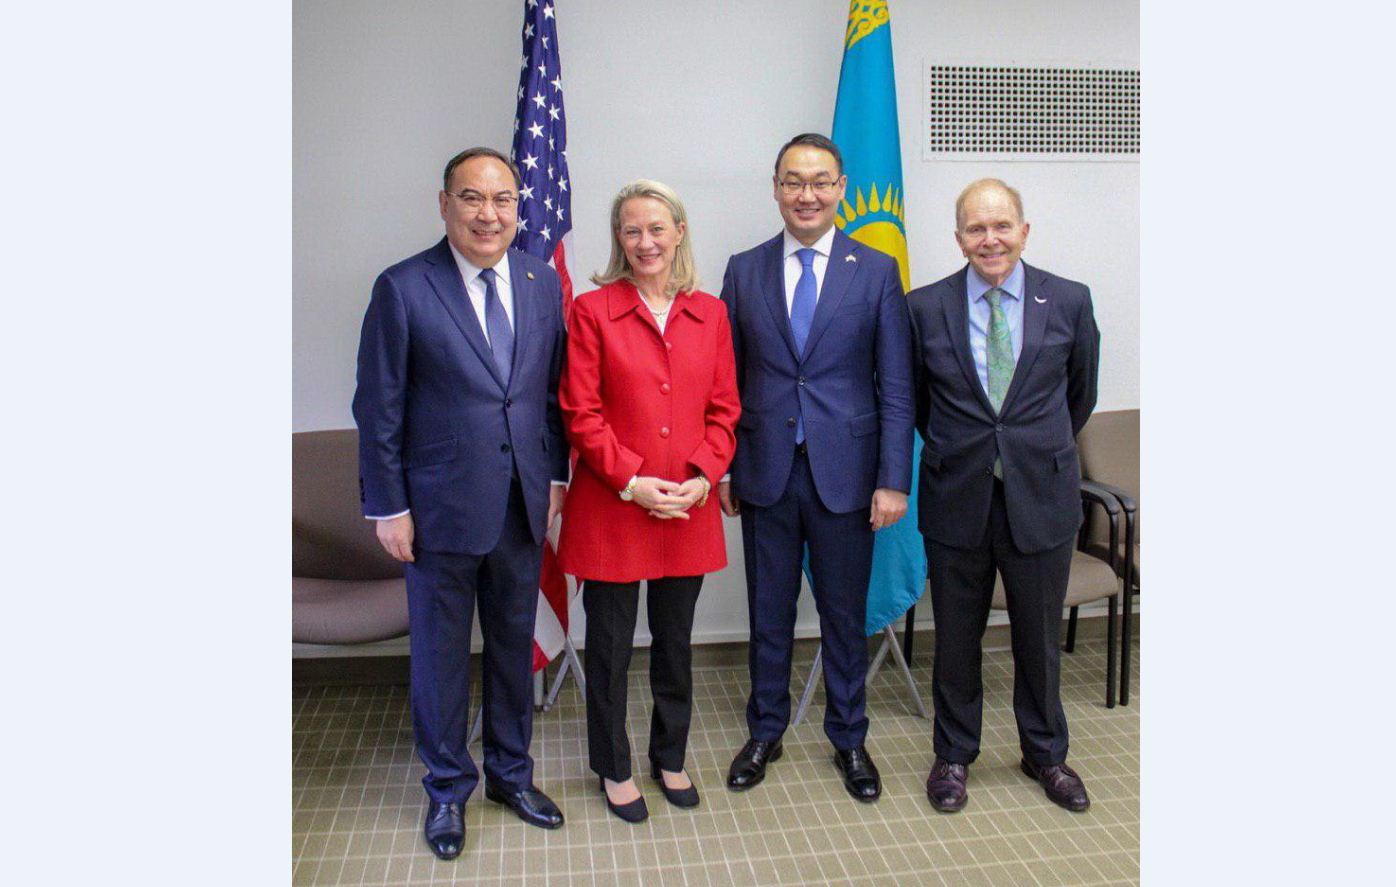 Partnership between Kazakhstan and the US discussed in Washington